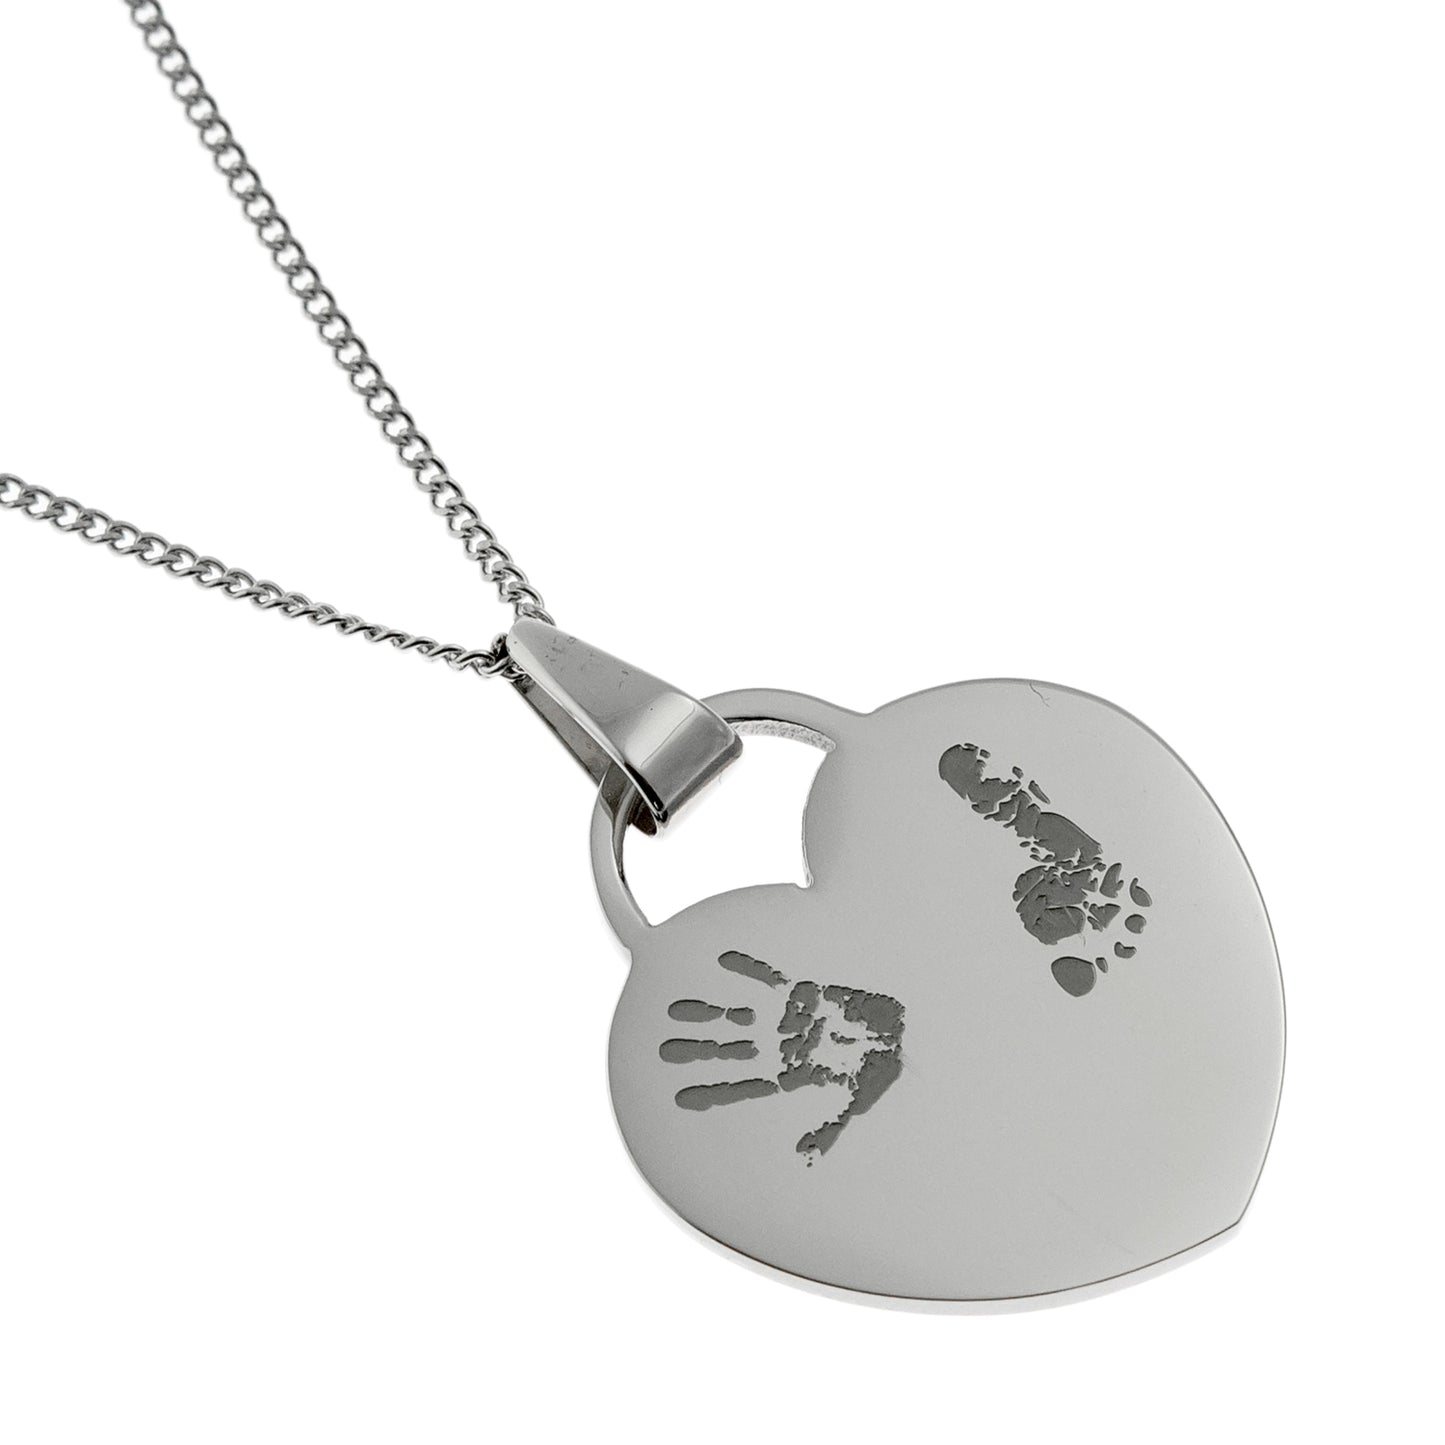 Stainless Steel Hand and Foot Print Heart Pendant Necklace - Sentimental Mother's Day or Birthday Gift for Mom